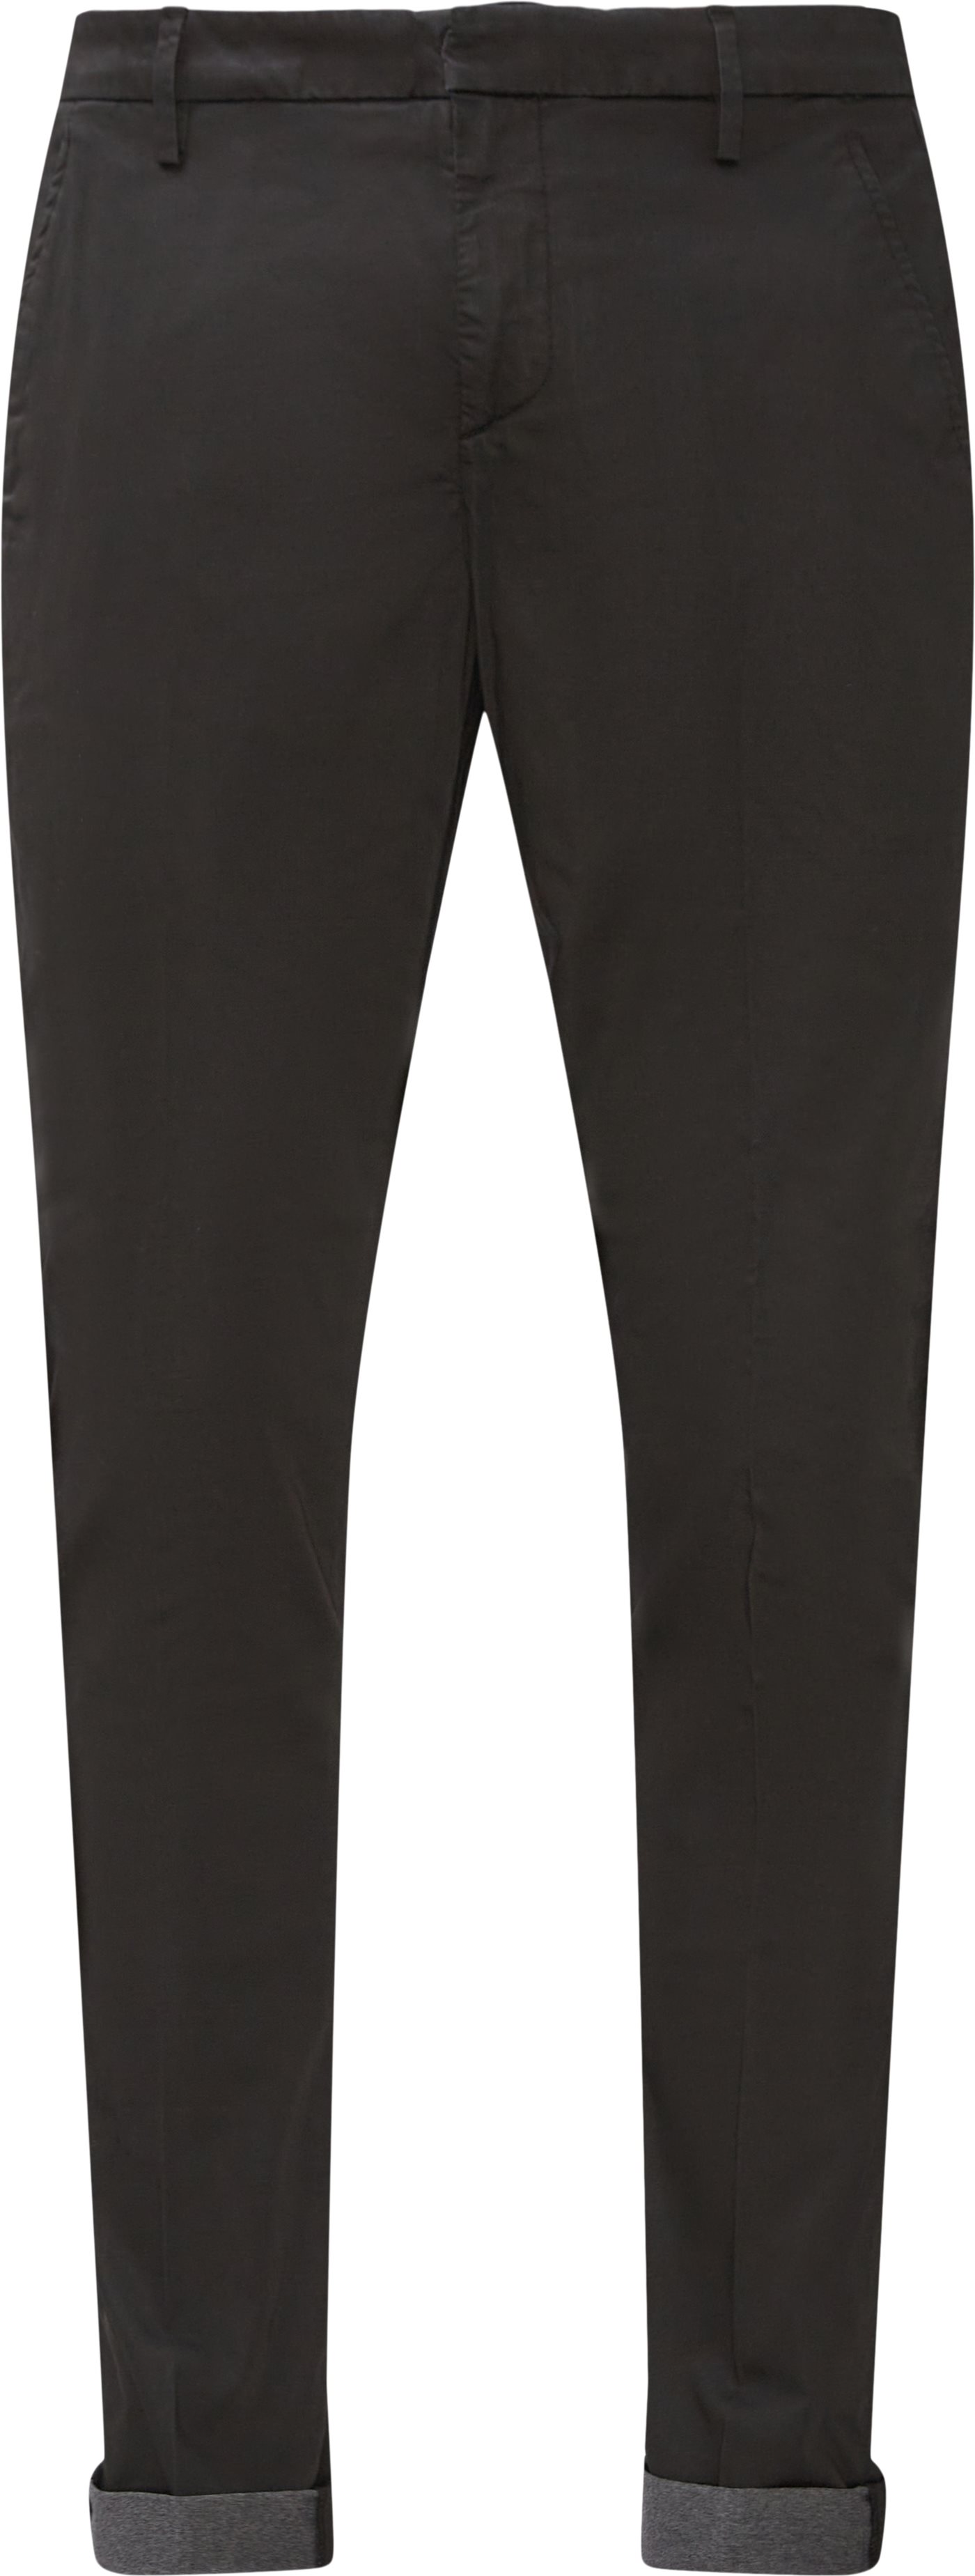 Classic Chino - Trousers - Slim fit - Black